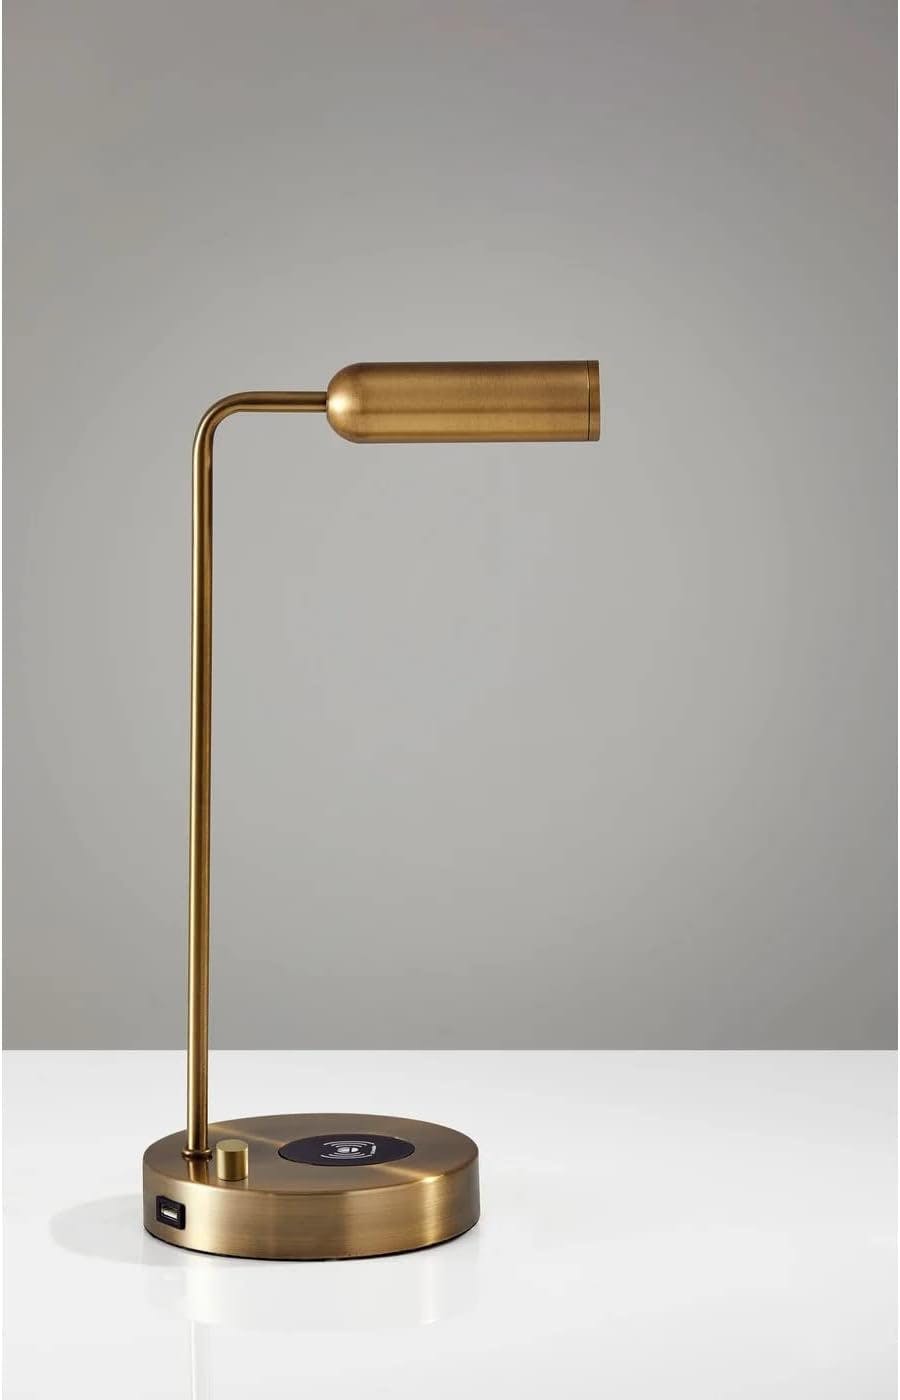 AdessoCharge 17" Antique Brass LED Desk Lamp with Wireless Charging